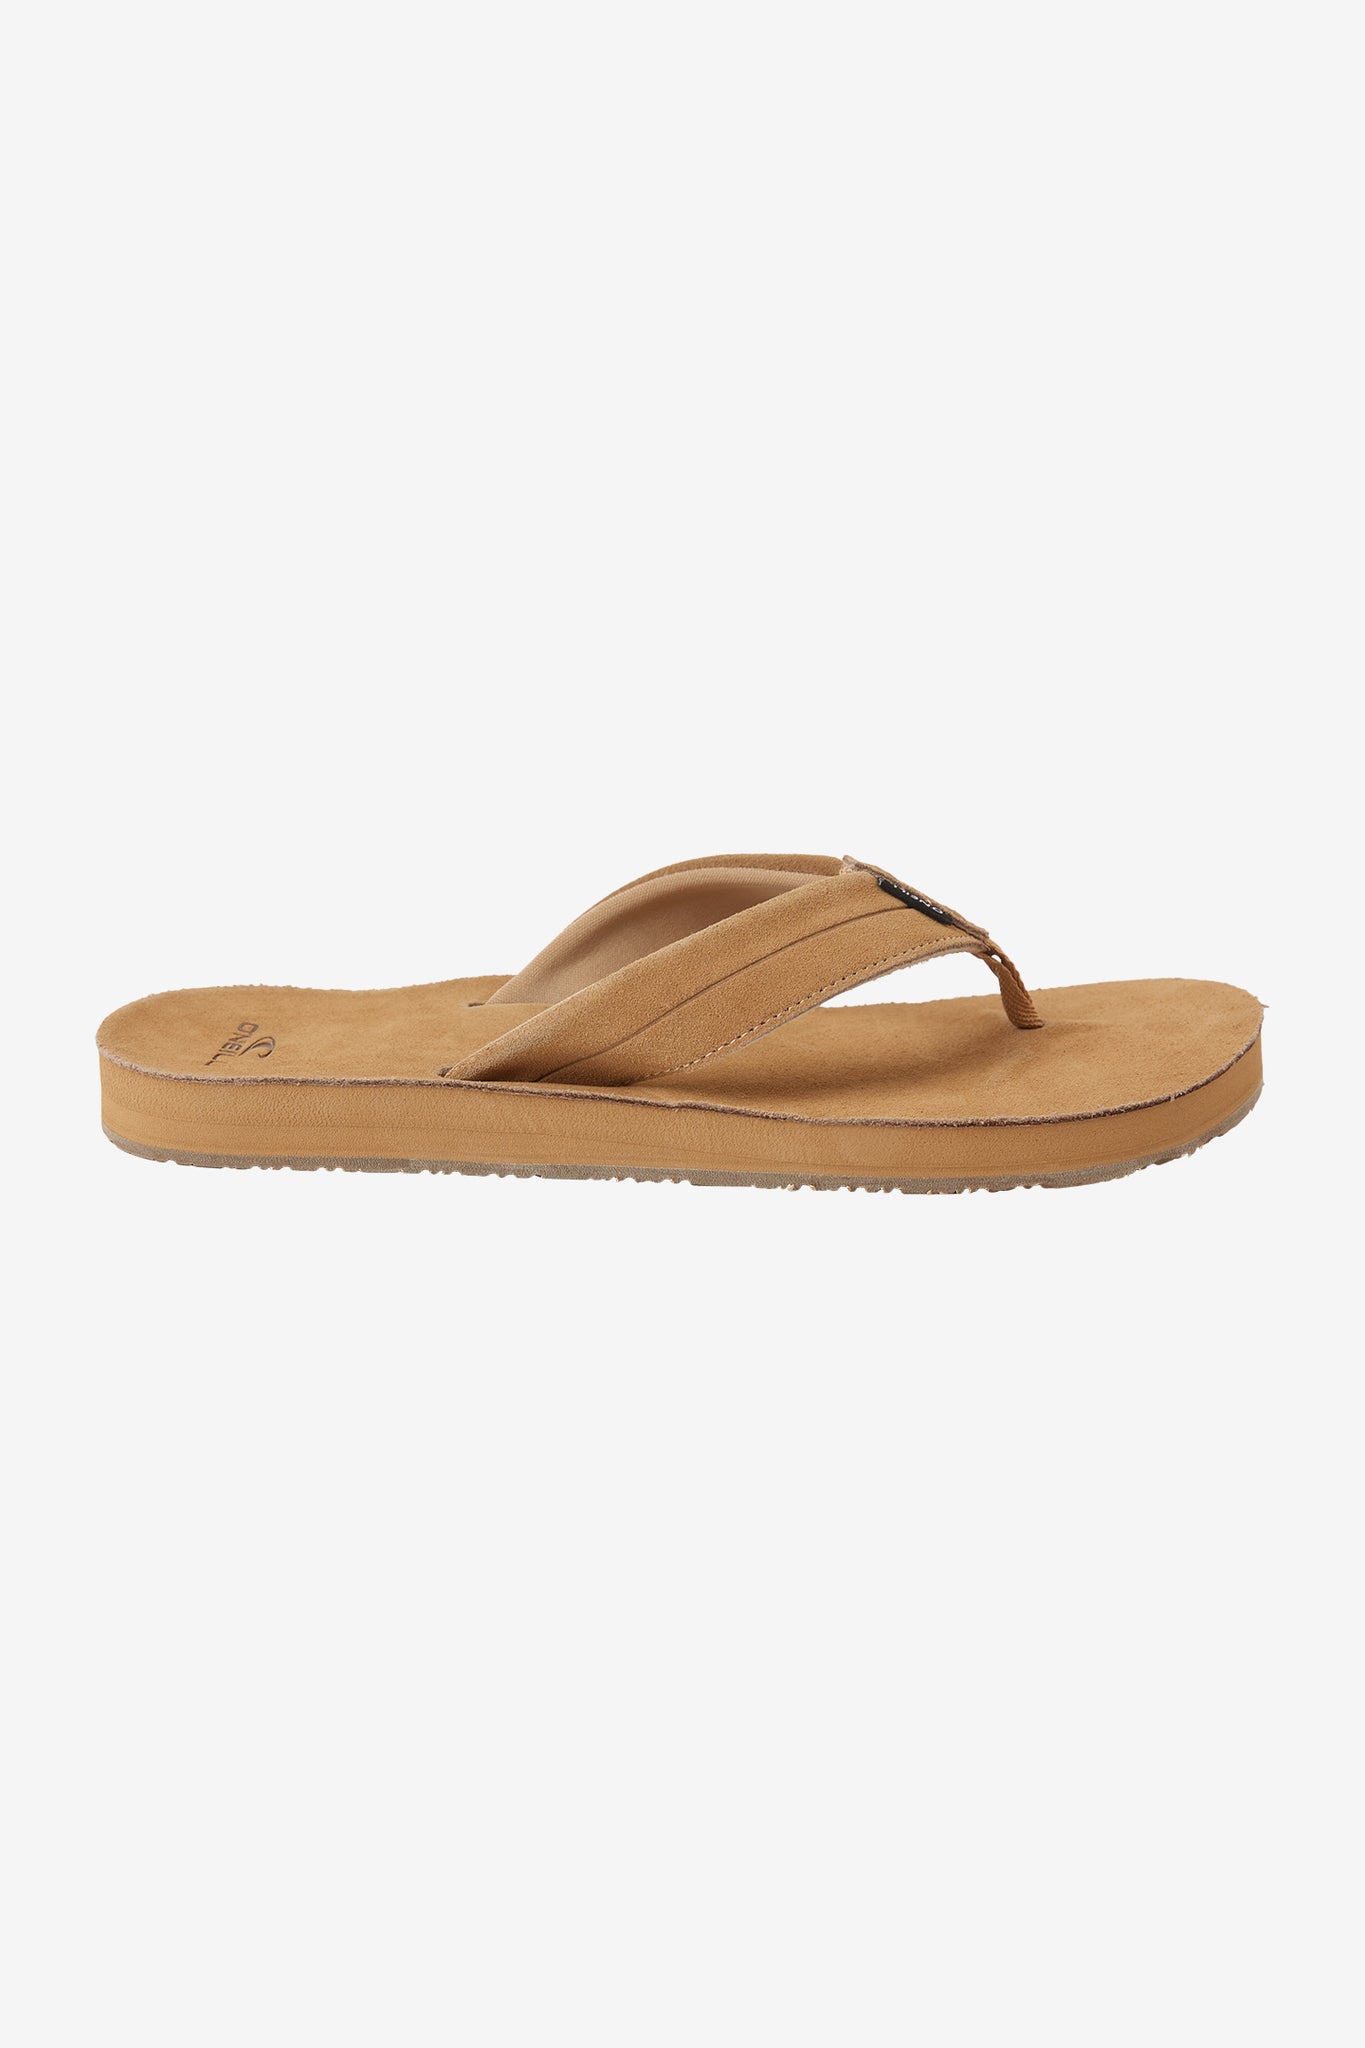 Groundswell Sandals - Tan | O'Neill